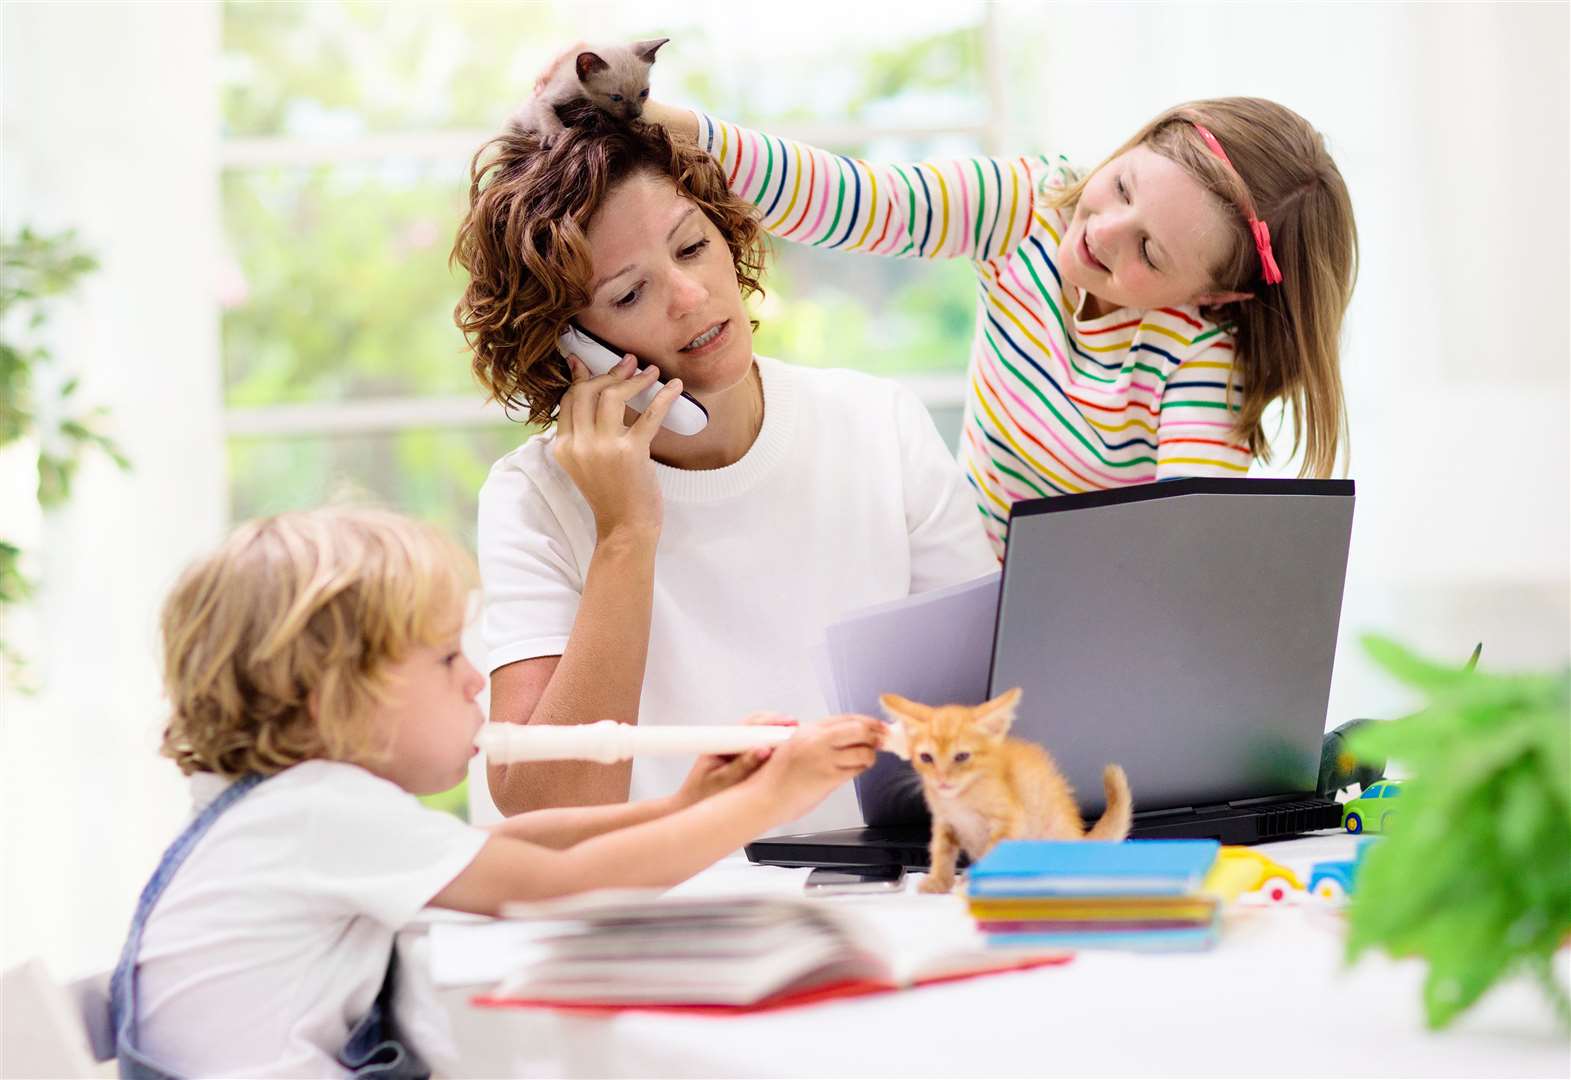 Changing attitudes to work: Will working from home and demands for greater flexibility to care for children and pets bring problems in the l...